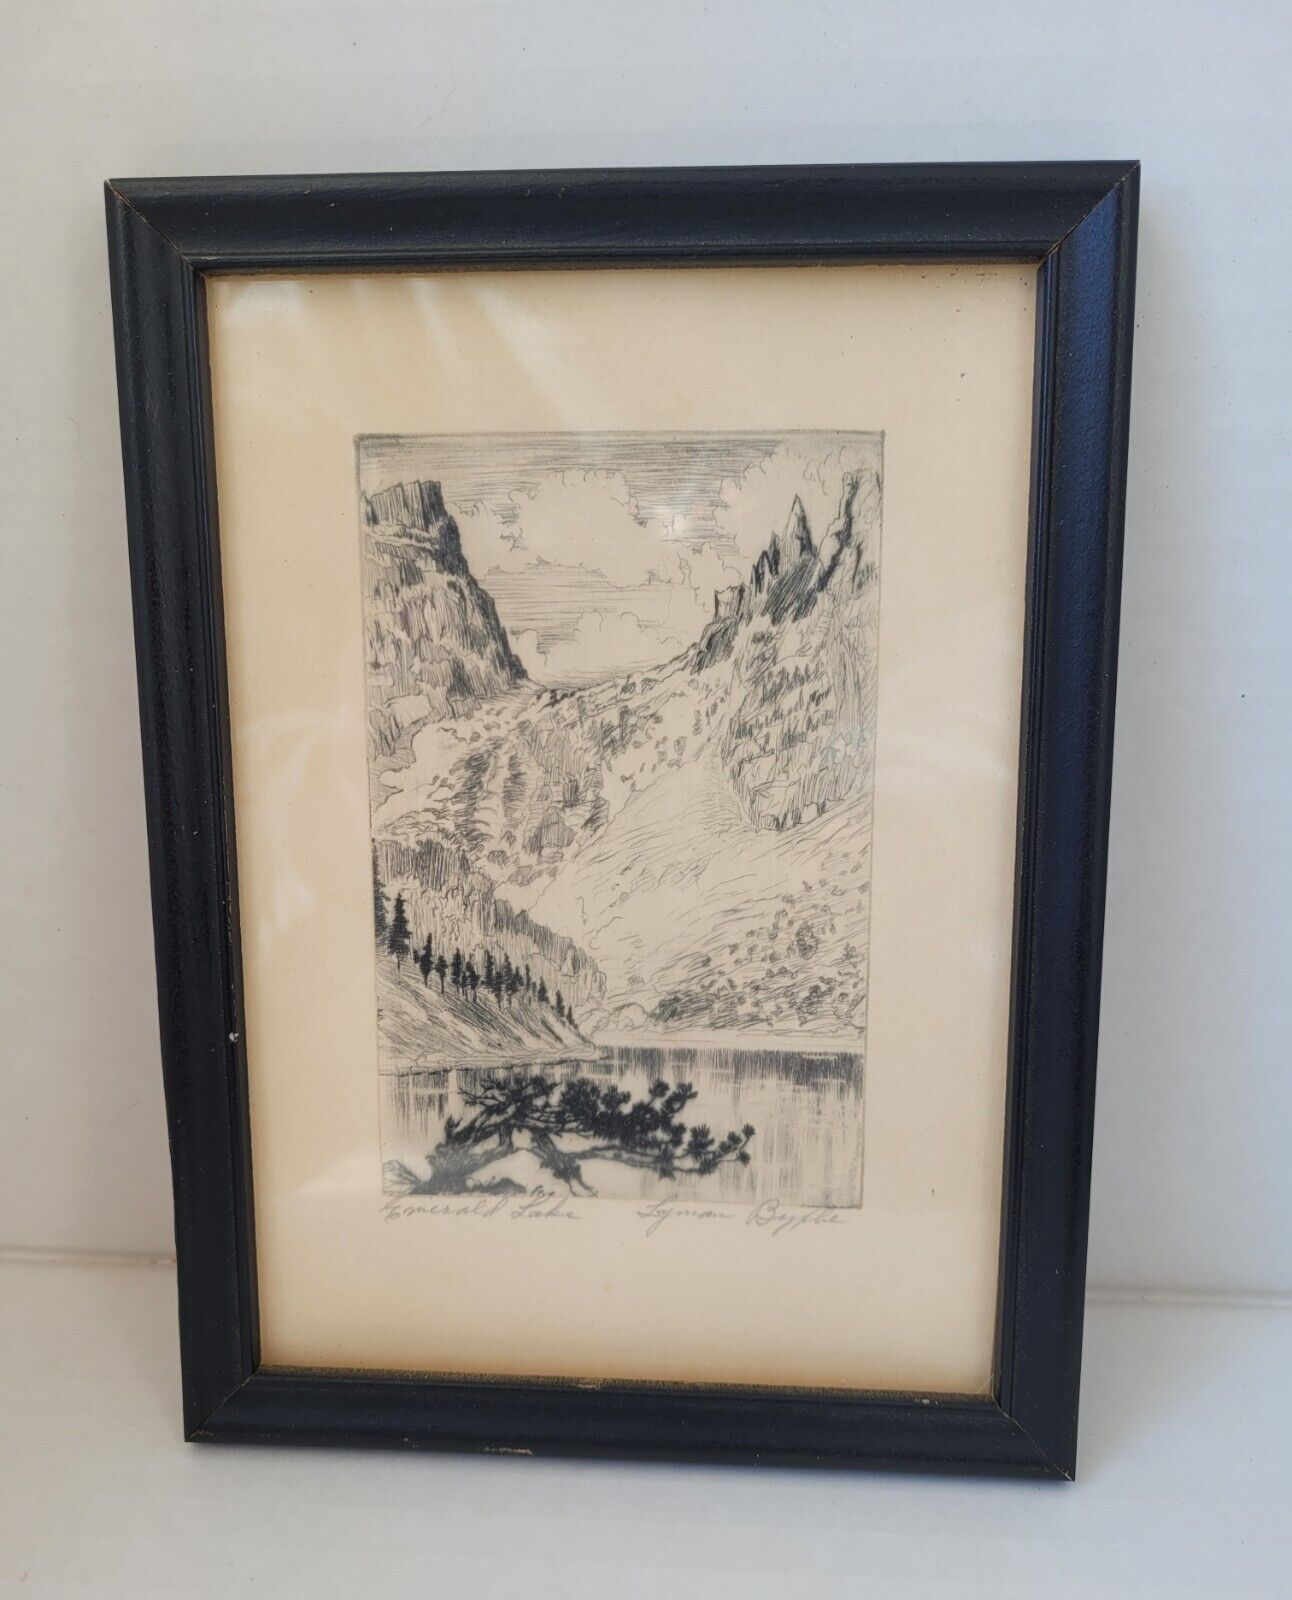 Lyman Byxbe (1886-1980) Emerald Lake  Signed And Framed Etching, c.1948